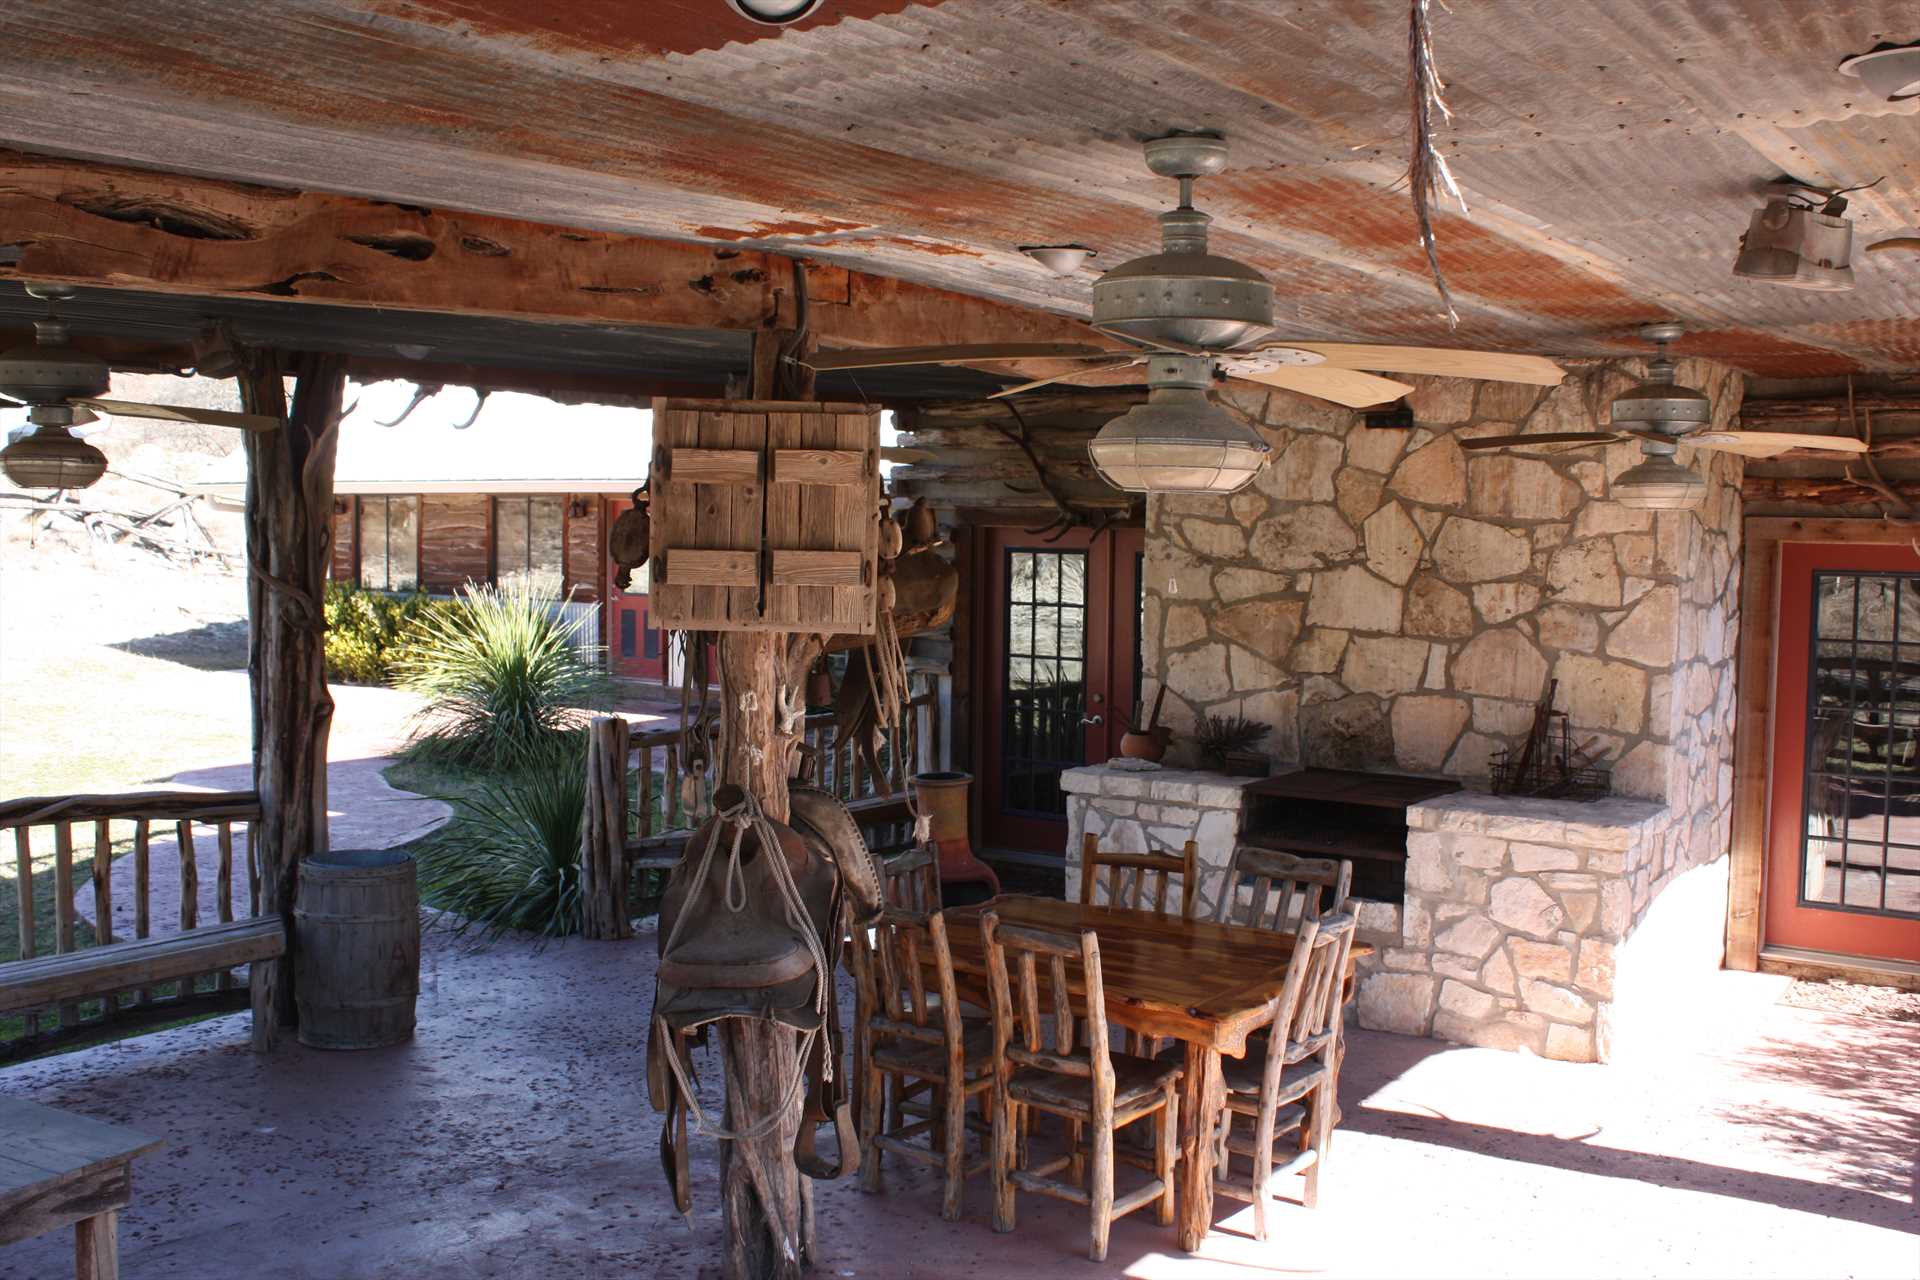                                                 Cool breezes and shaded comfort surround the grill on the lower level patio.